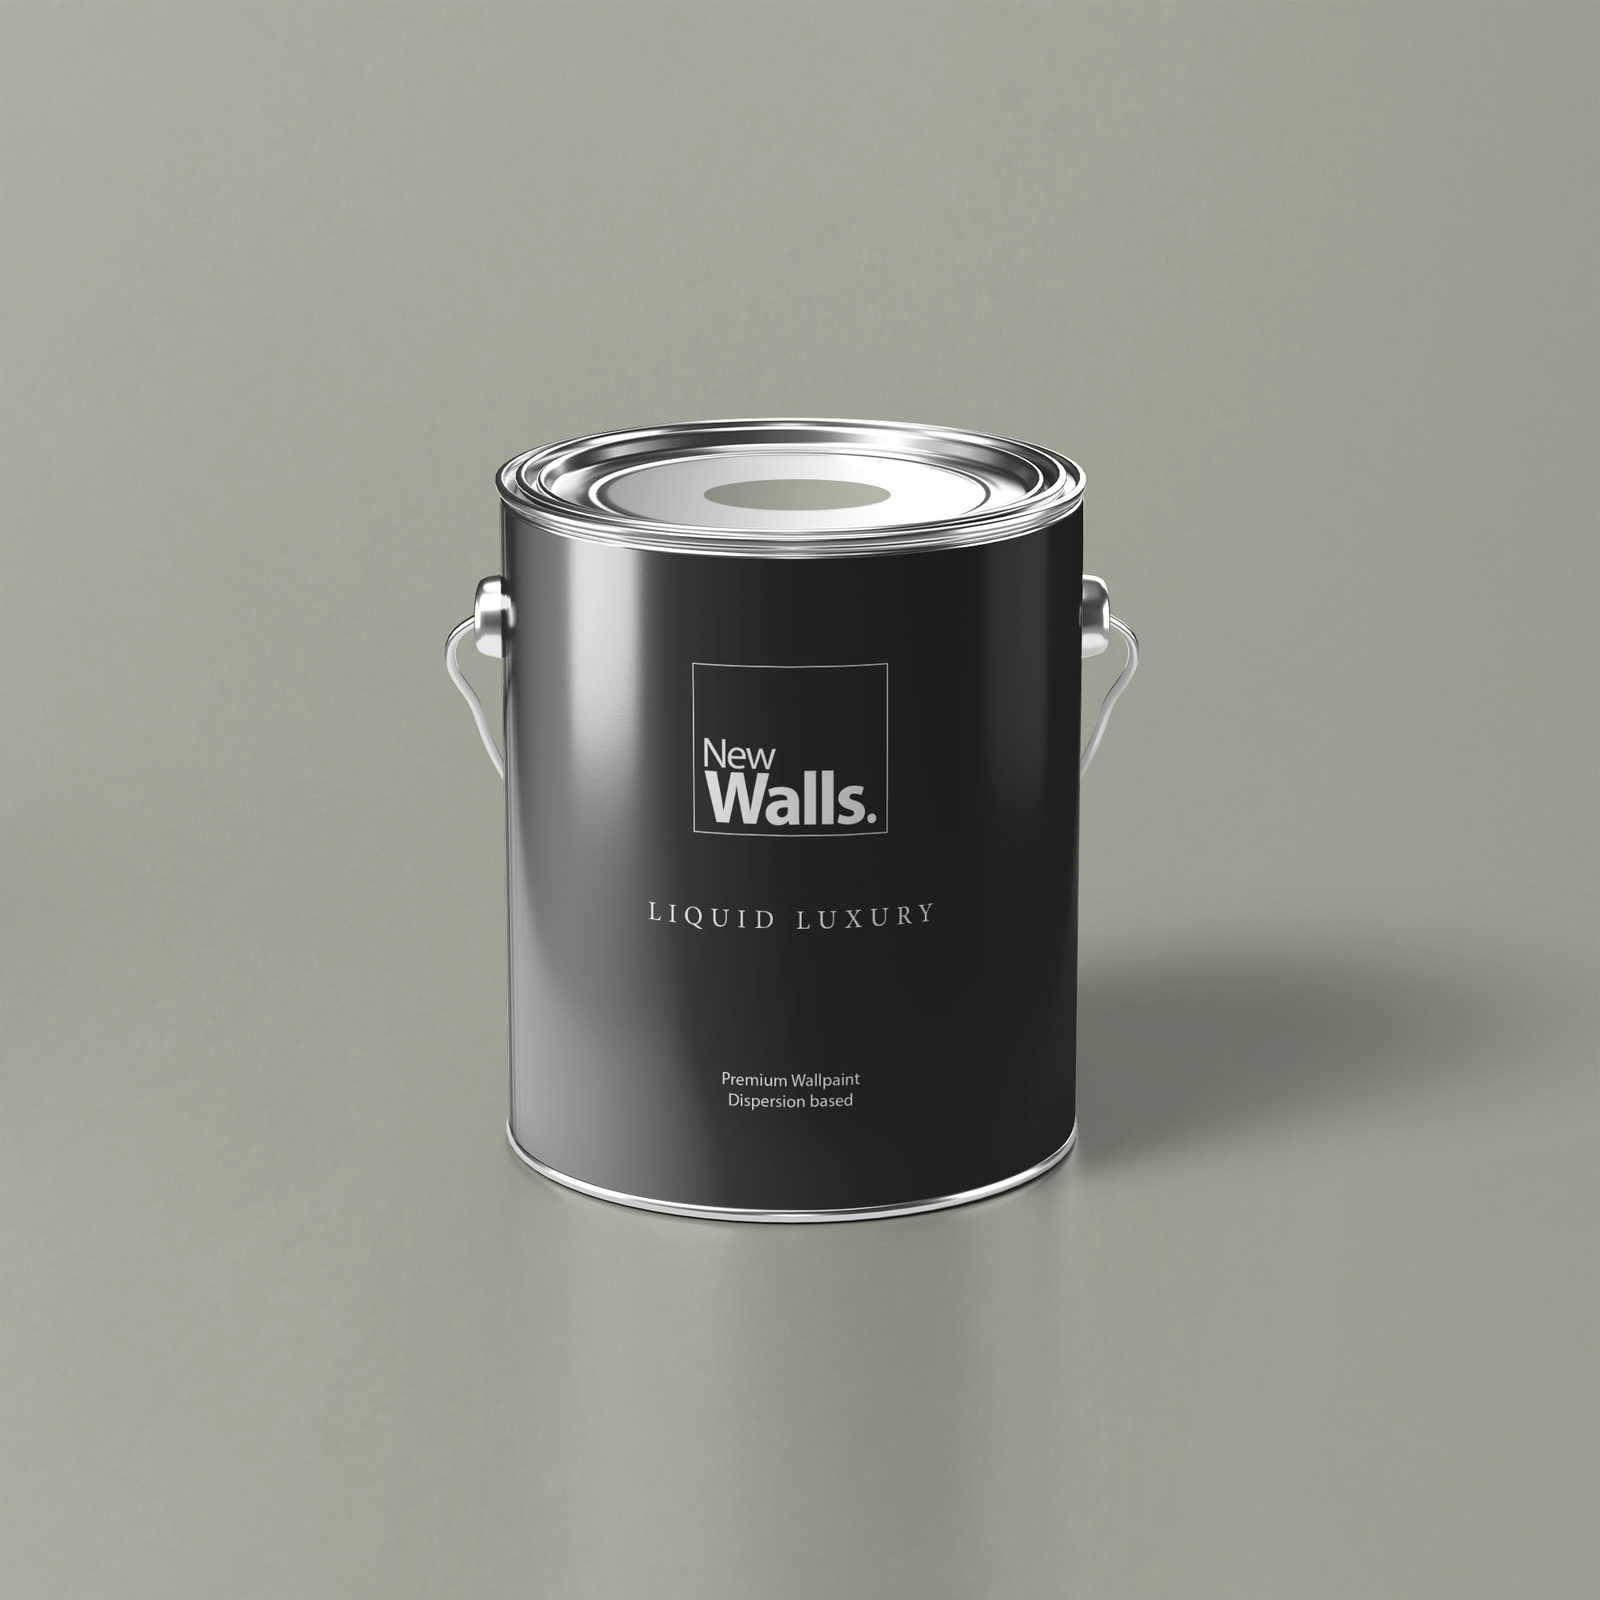 Premium Wall Paint Soft Olive Green »Talented calm taupe« NW705 – 5 litre
